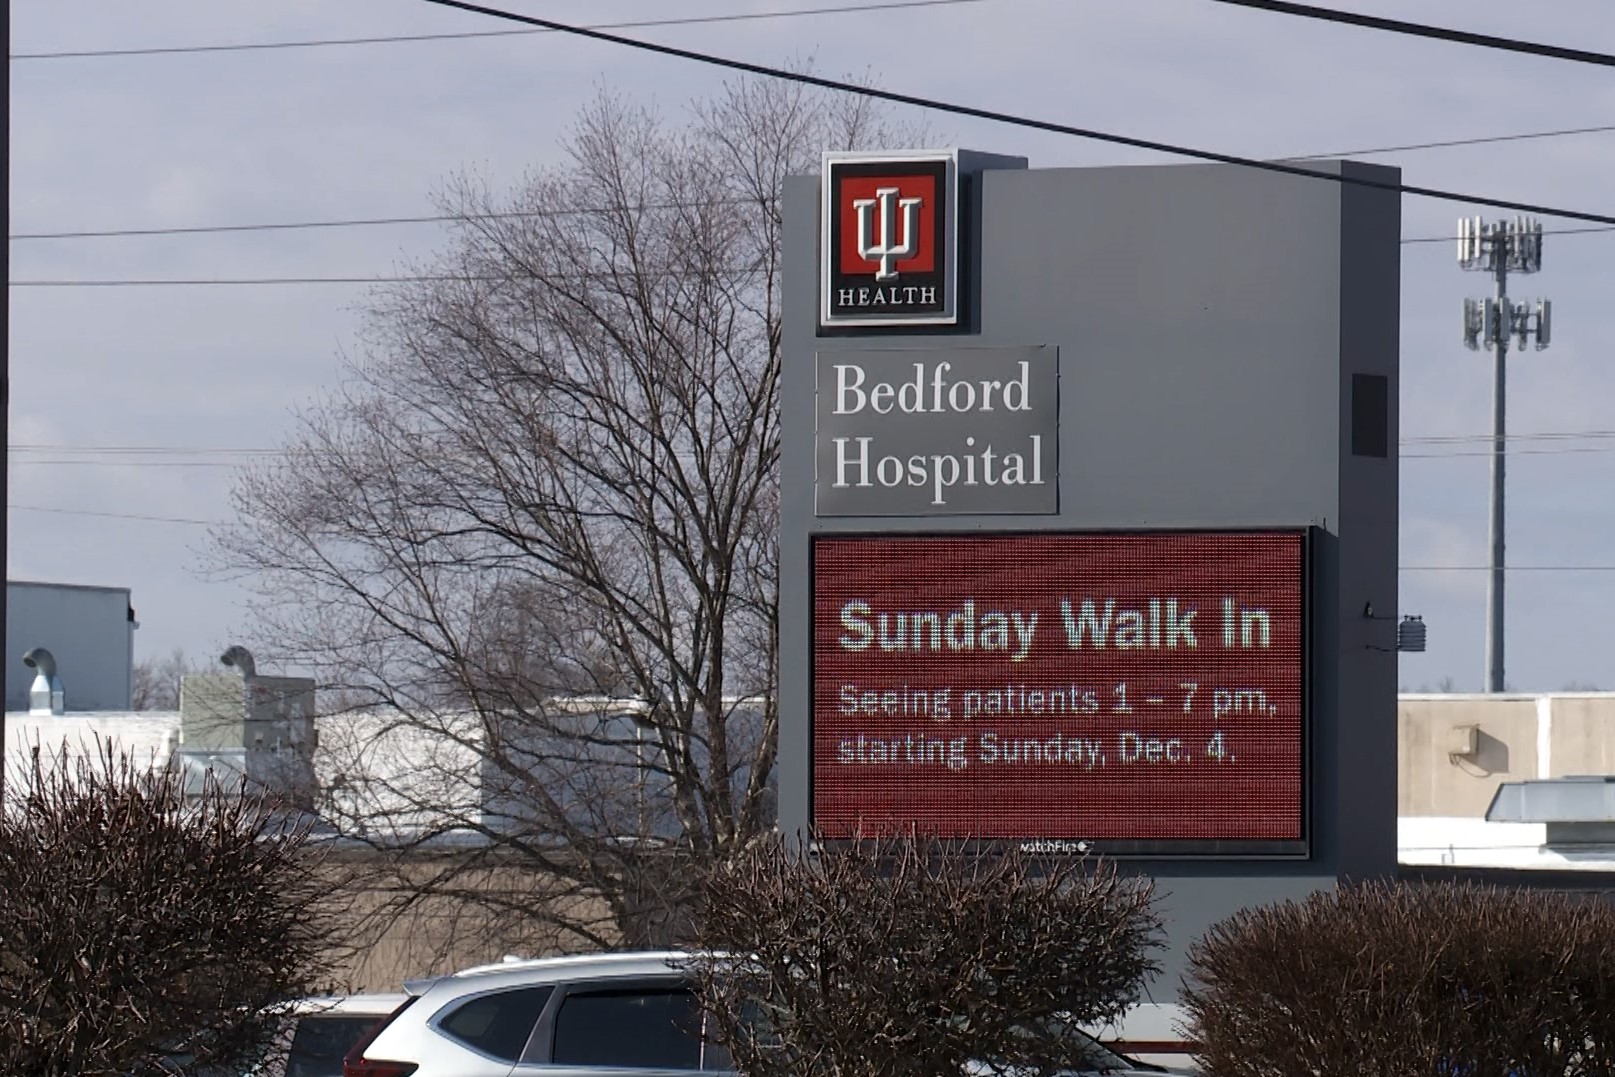 IU Health Bedford has hired new staff and altered its hours to prepare for the influx of new patients